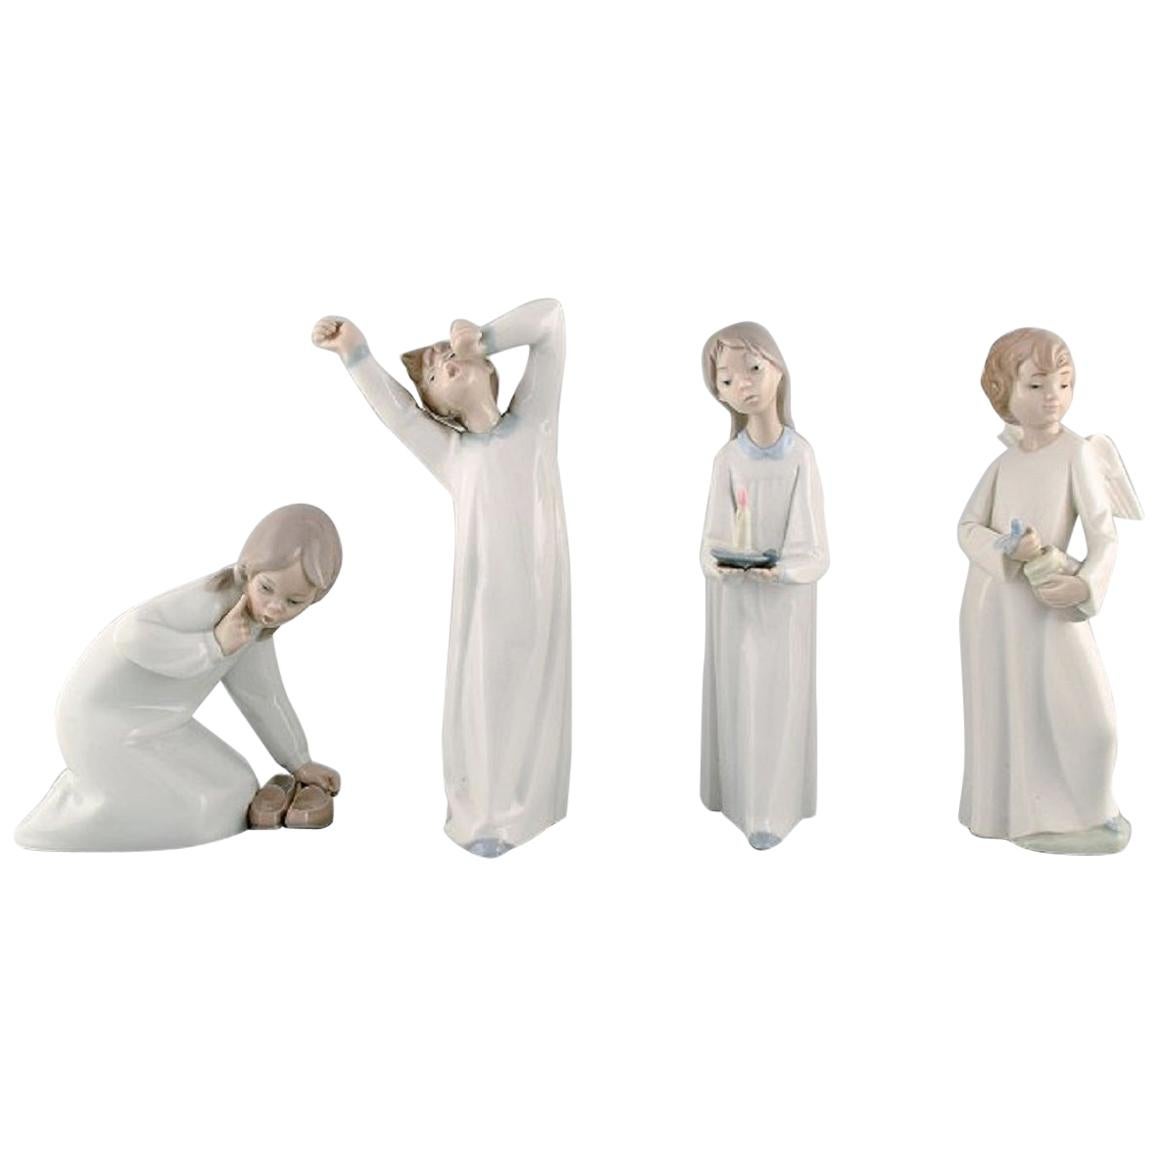 Lladro and Nao, Spain, Four Porcelain Figurines of Children, 1980s-1990s